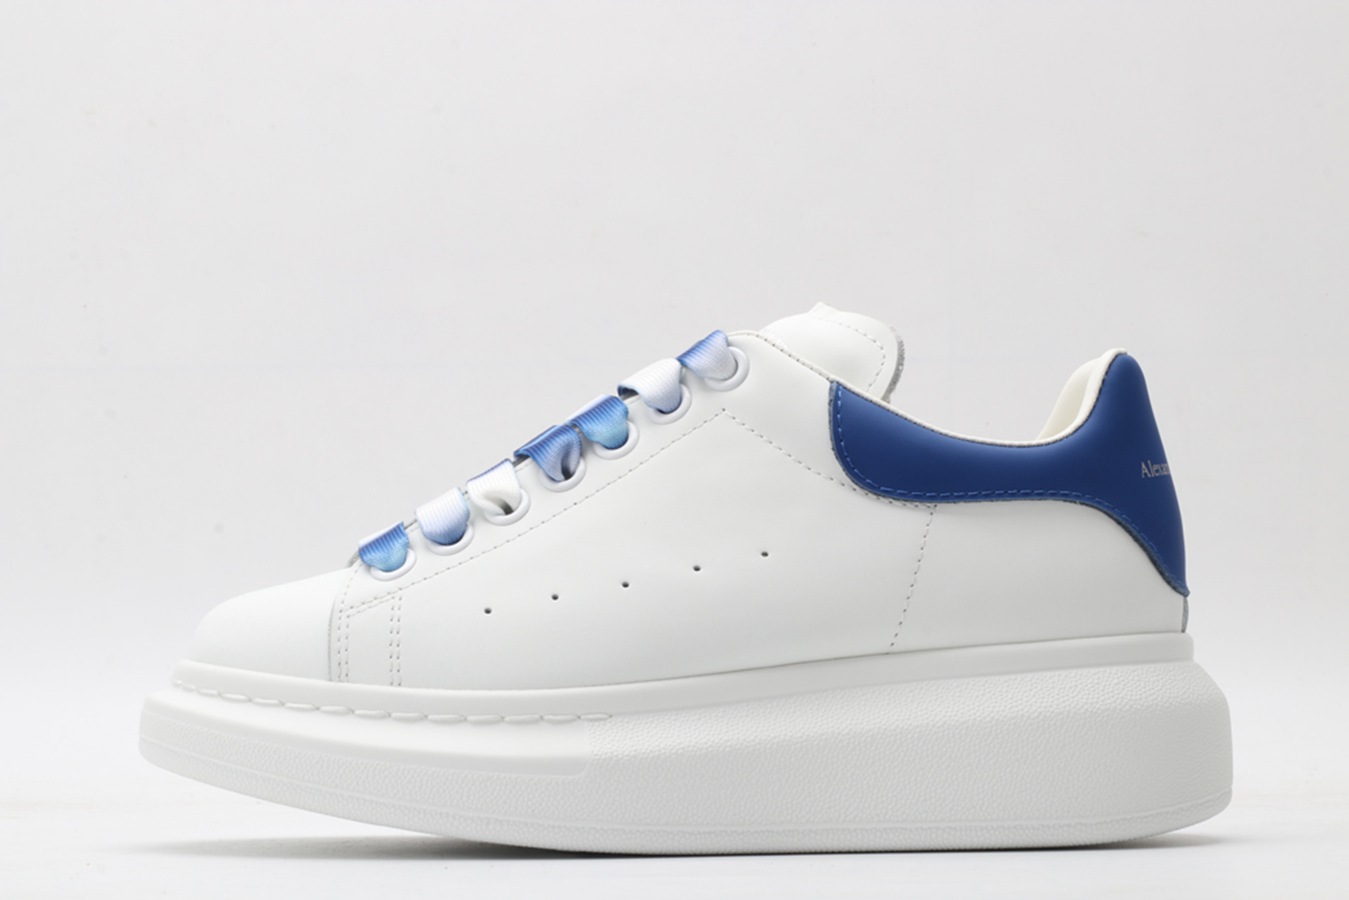 AMQ-oversized-sneakers-with-blue-heel.jpg